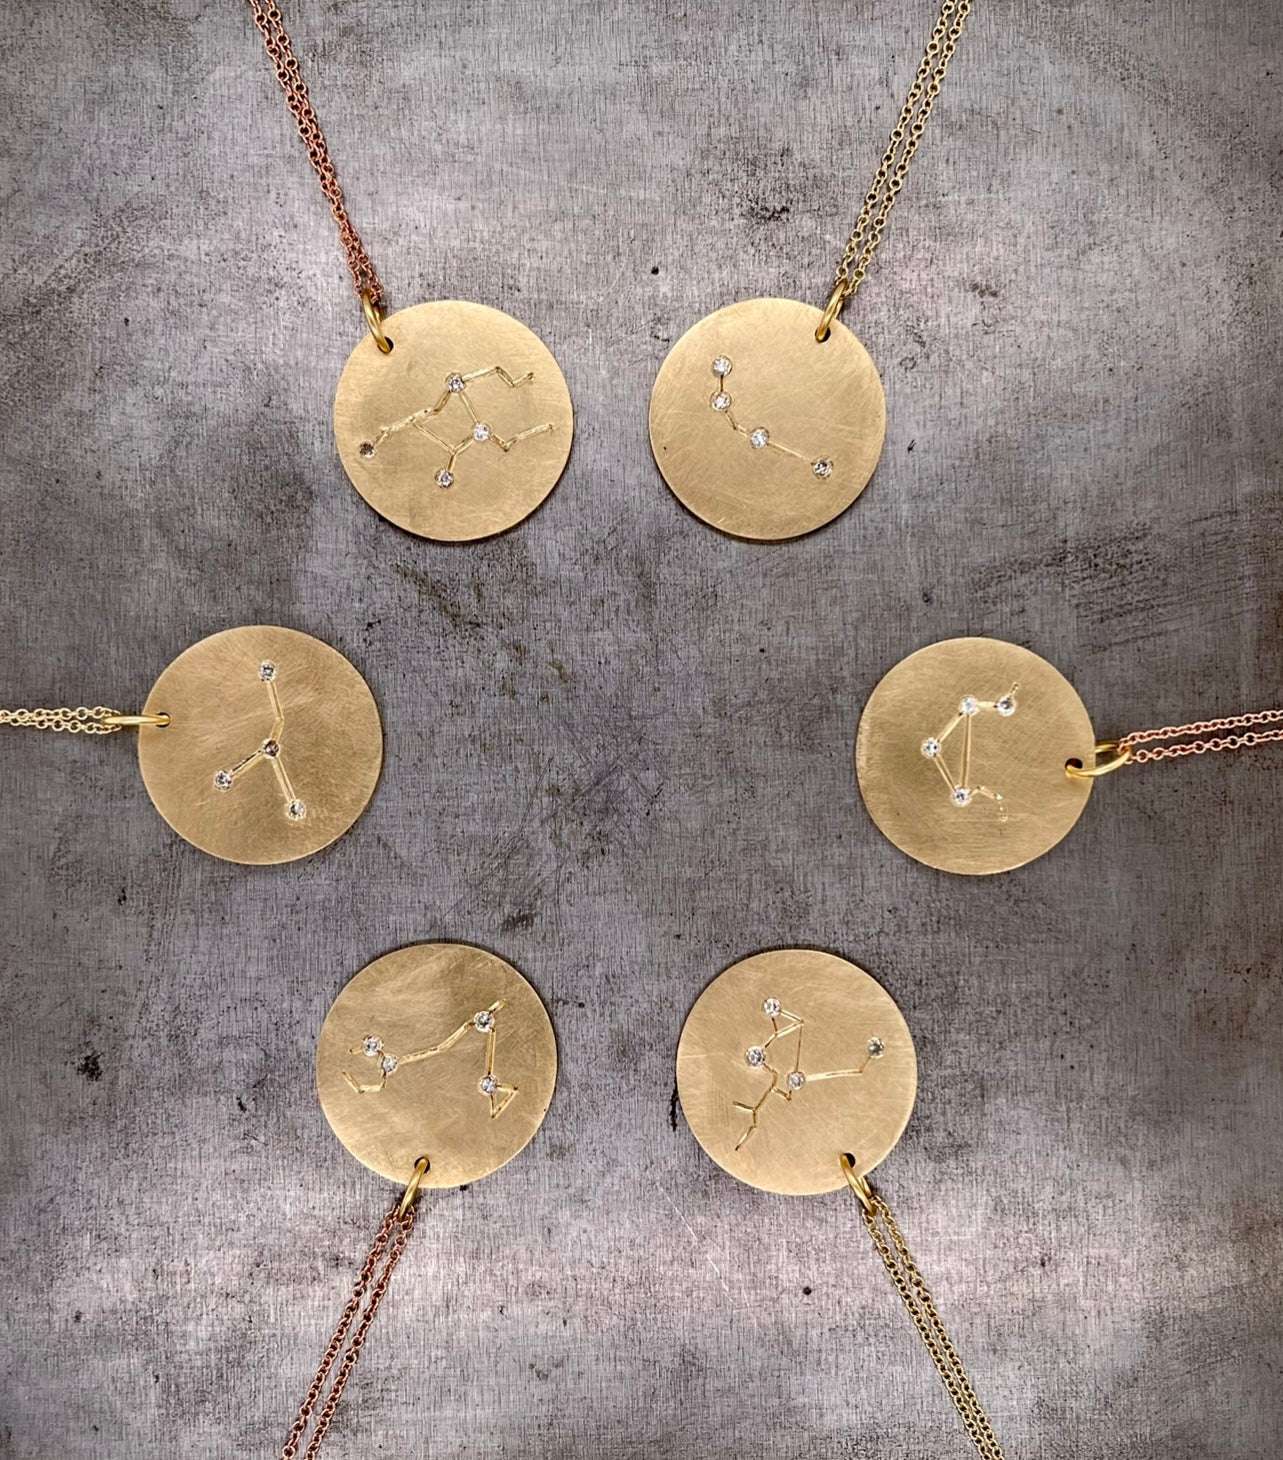 Close up view of six zodiac pendants arranged in a circle. The top left features Virgo, and then going clockwise it is Aries, Libra, Sagittarius, Pisces and Cancer.